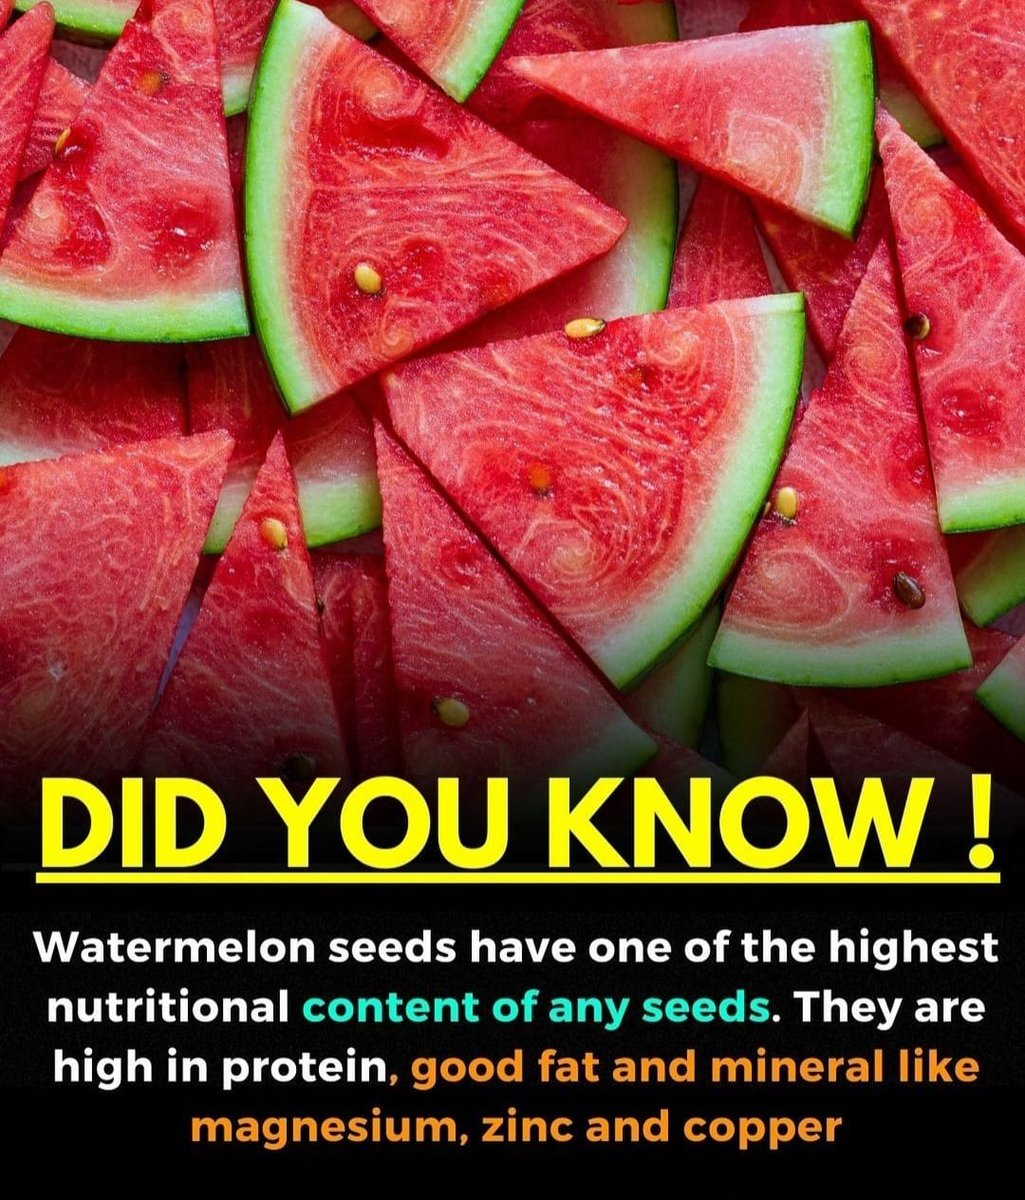 Did you know? 🍉🤯

Those crunchy watermelon seeds pack a serious nutritional punch! #WatermelonSeeds are one of the most nutritious #SeedVarieties out there.

They're loaded with: 🥤 #HighProtein for muscle building 💪 #GoodFats to support heart health 👌 #MineralRich sources of